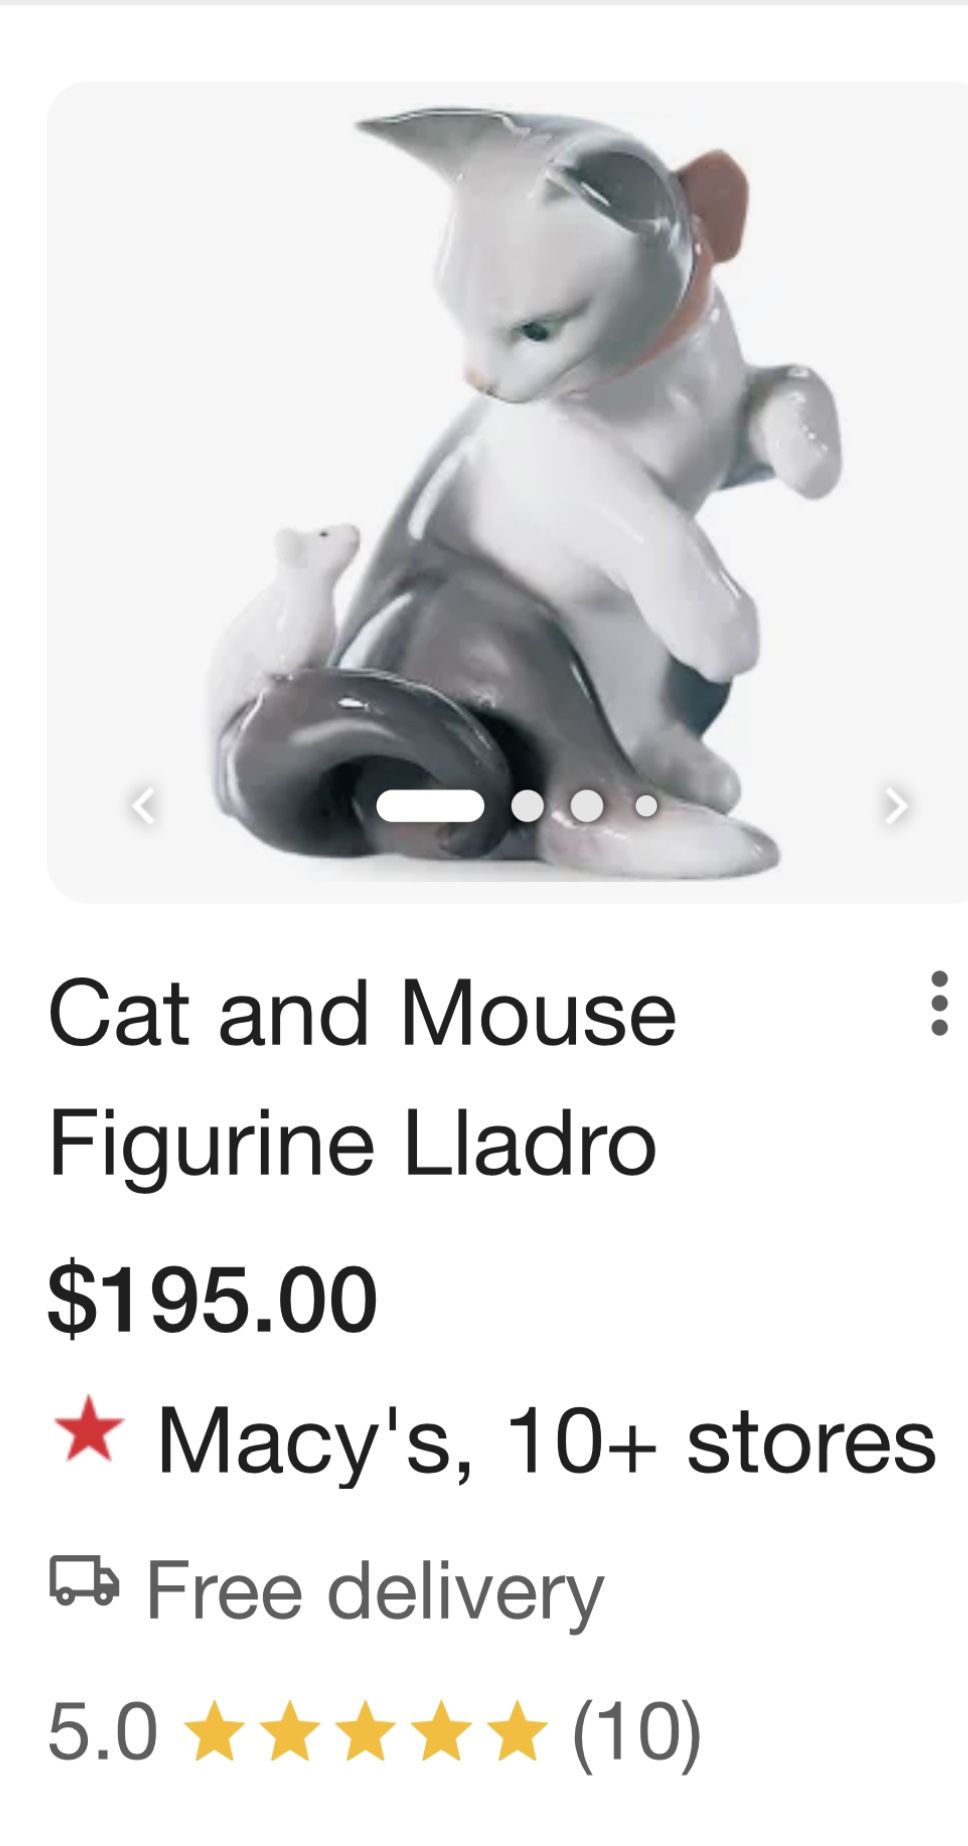 Lladro Cat and Mouse figurine